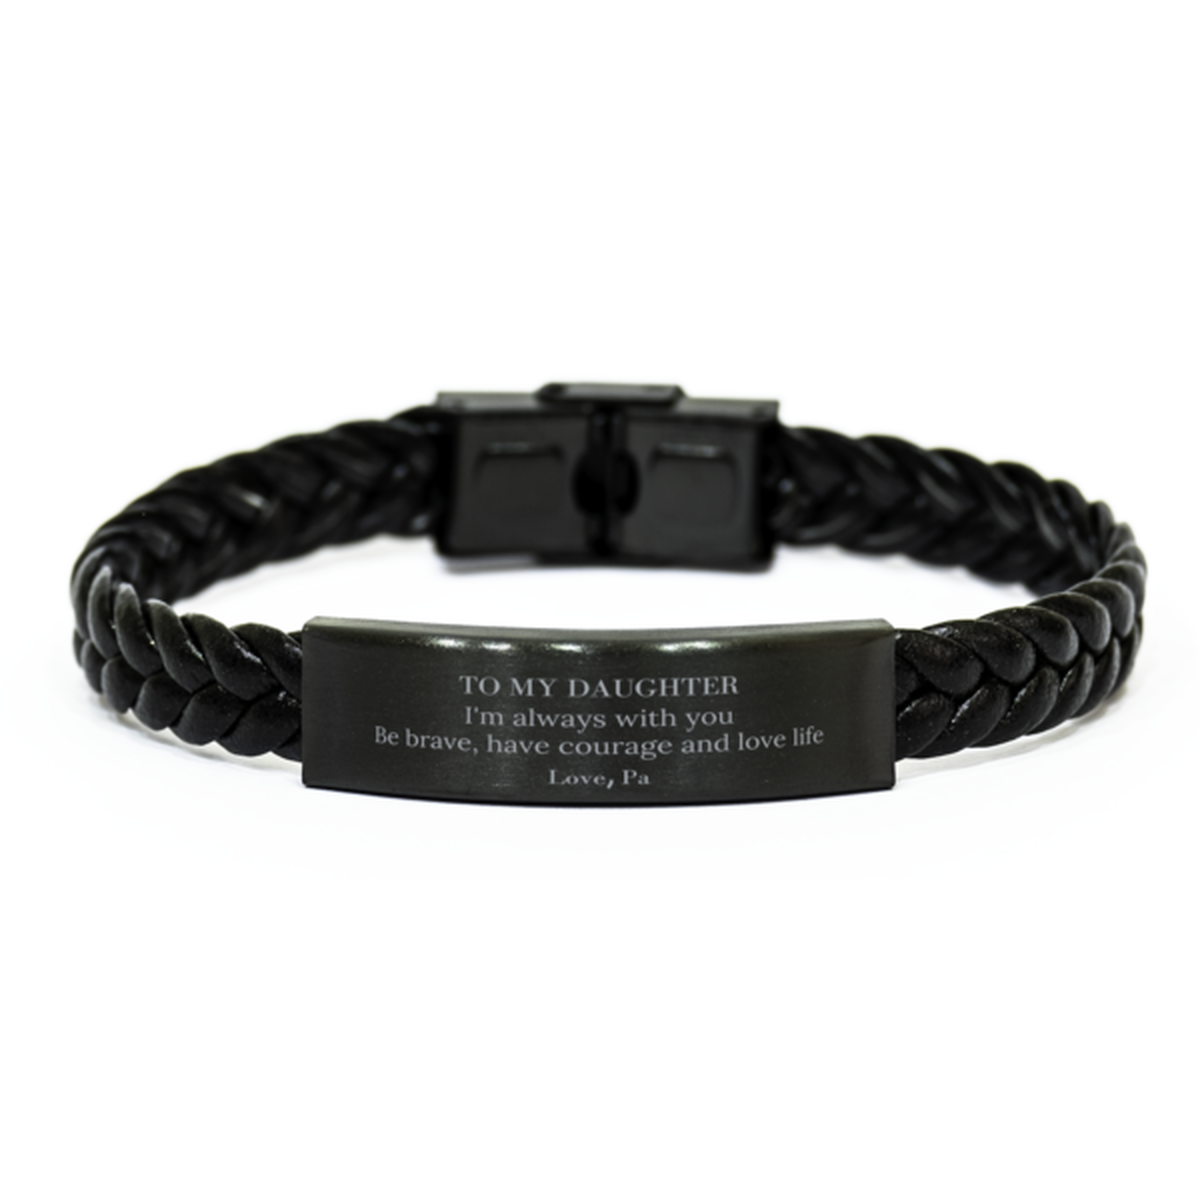 To My Daughter Gifts from Pa, Unique Braided Leather Bracelet Inspirational Christmas Birthday Graduation Gifts for Daughter I'm always with you. Be brave, have courage and love life. Love, Pa